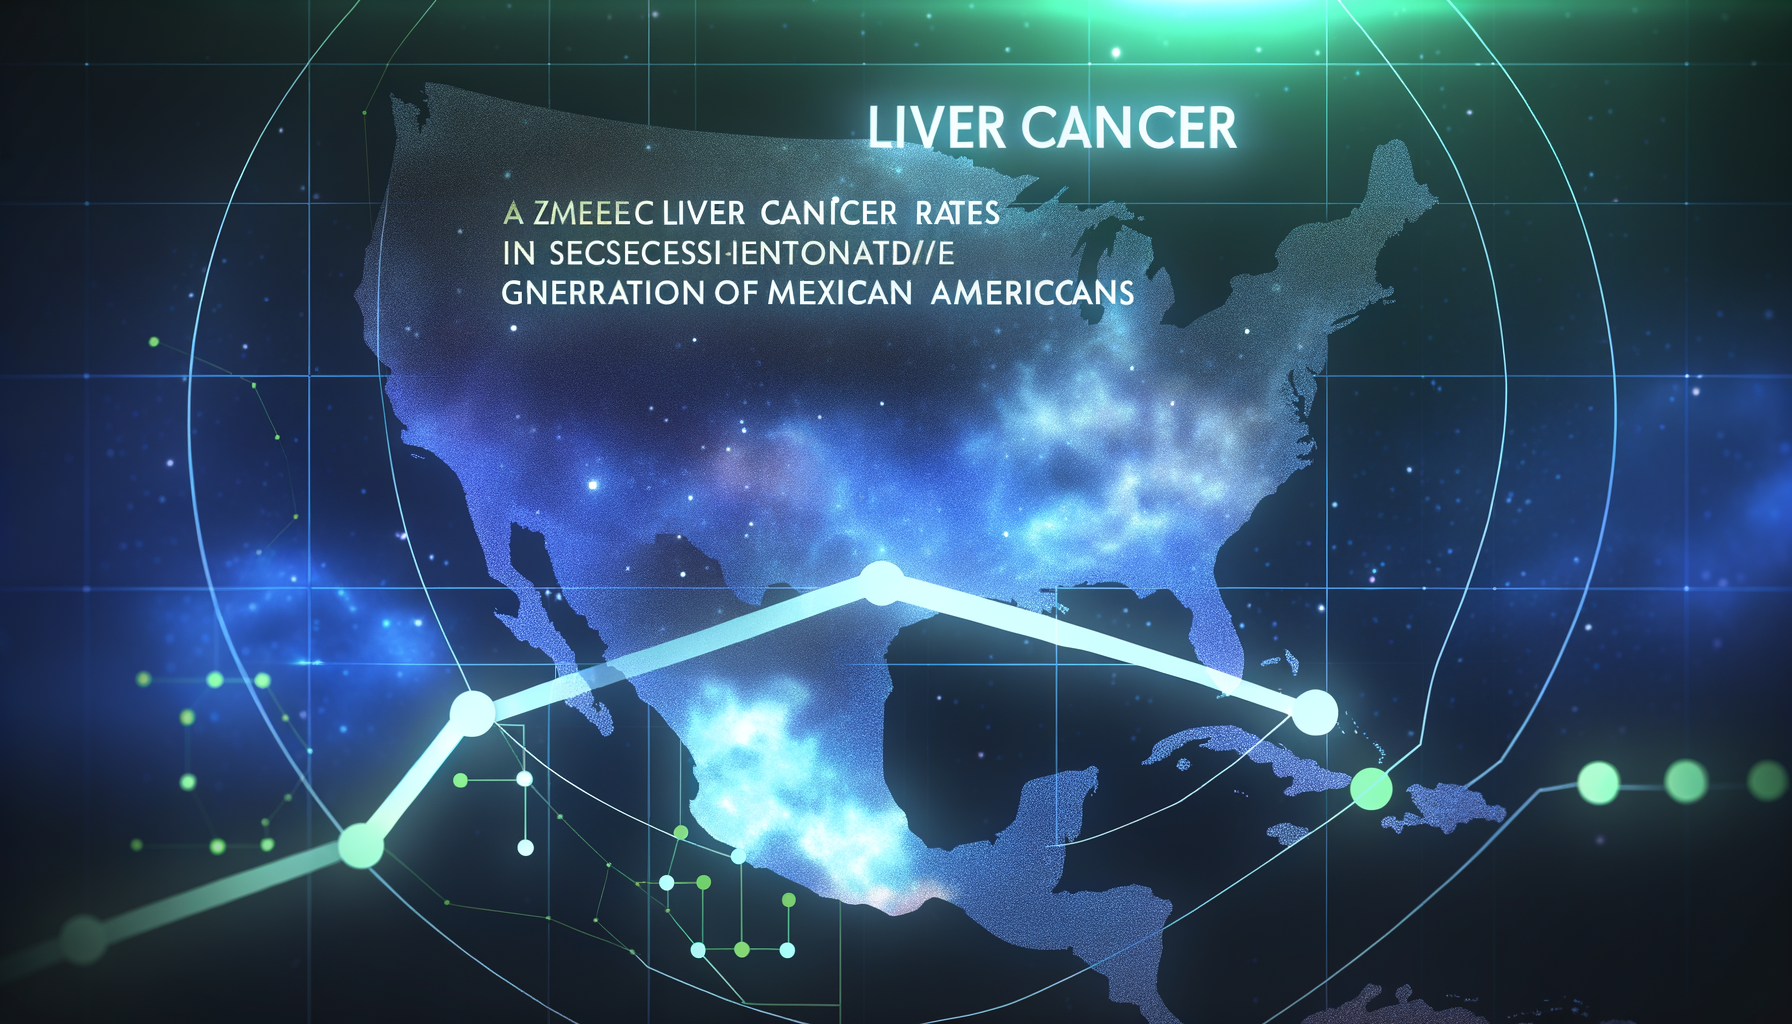 Liver cancer rates rising in successive generations of Mexican Americans